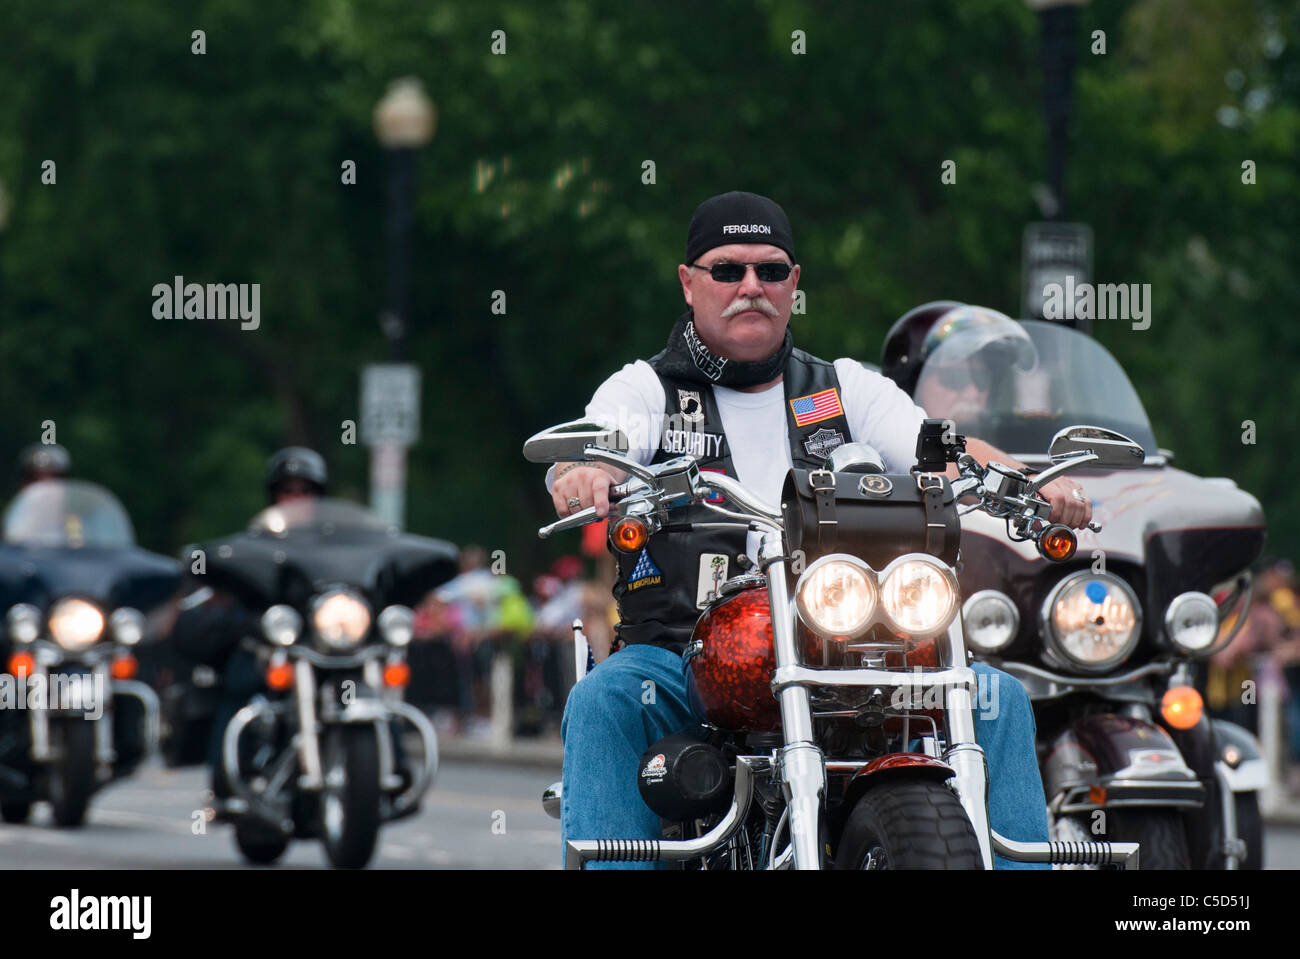 Washington DC, Rolling Thunder, Memorial Day Motorcycle event Stock Photo